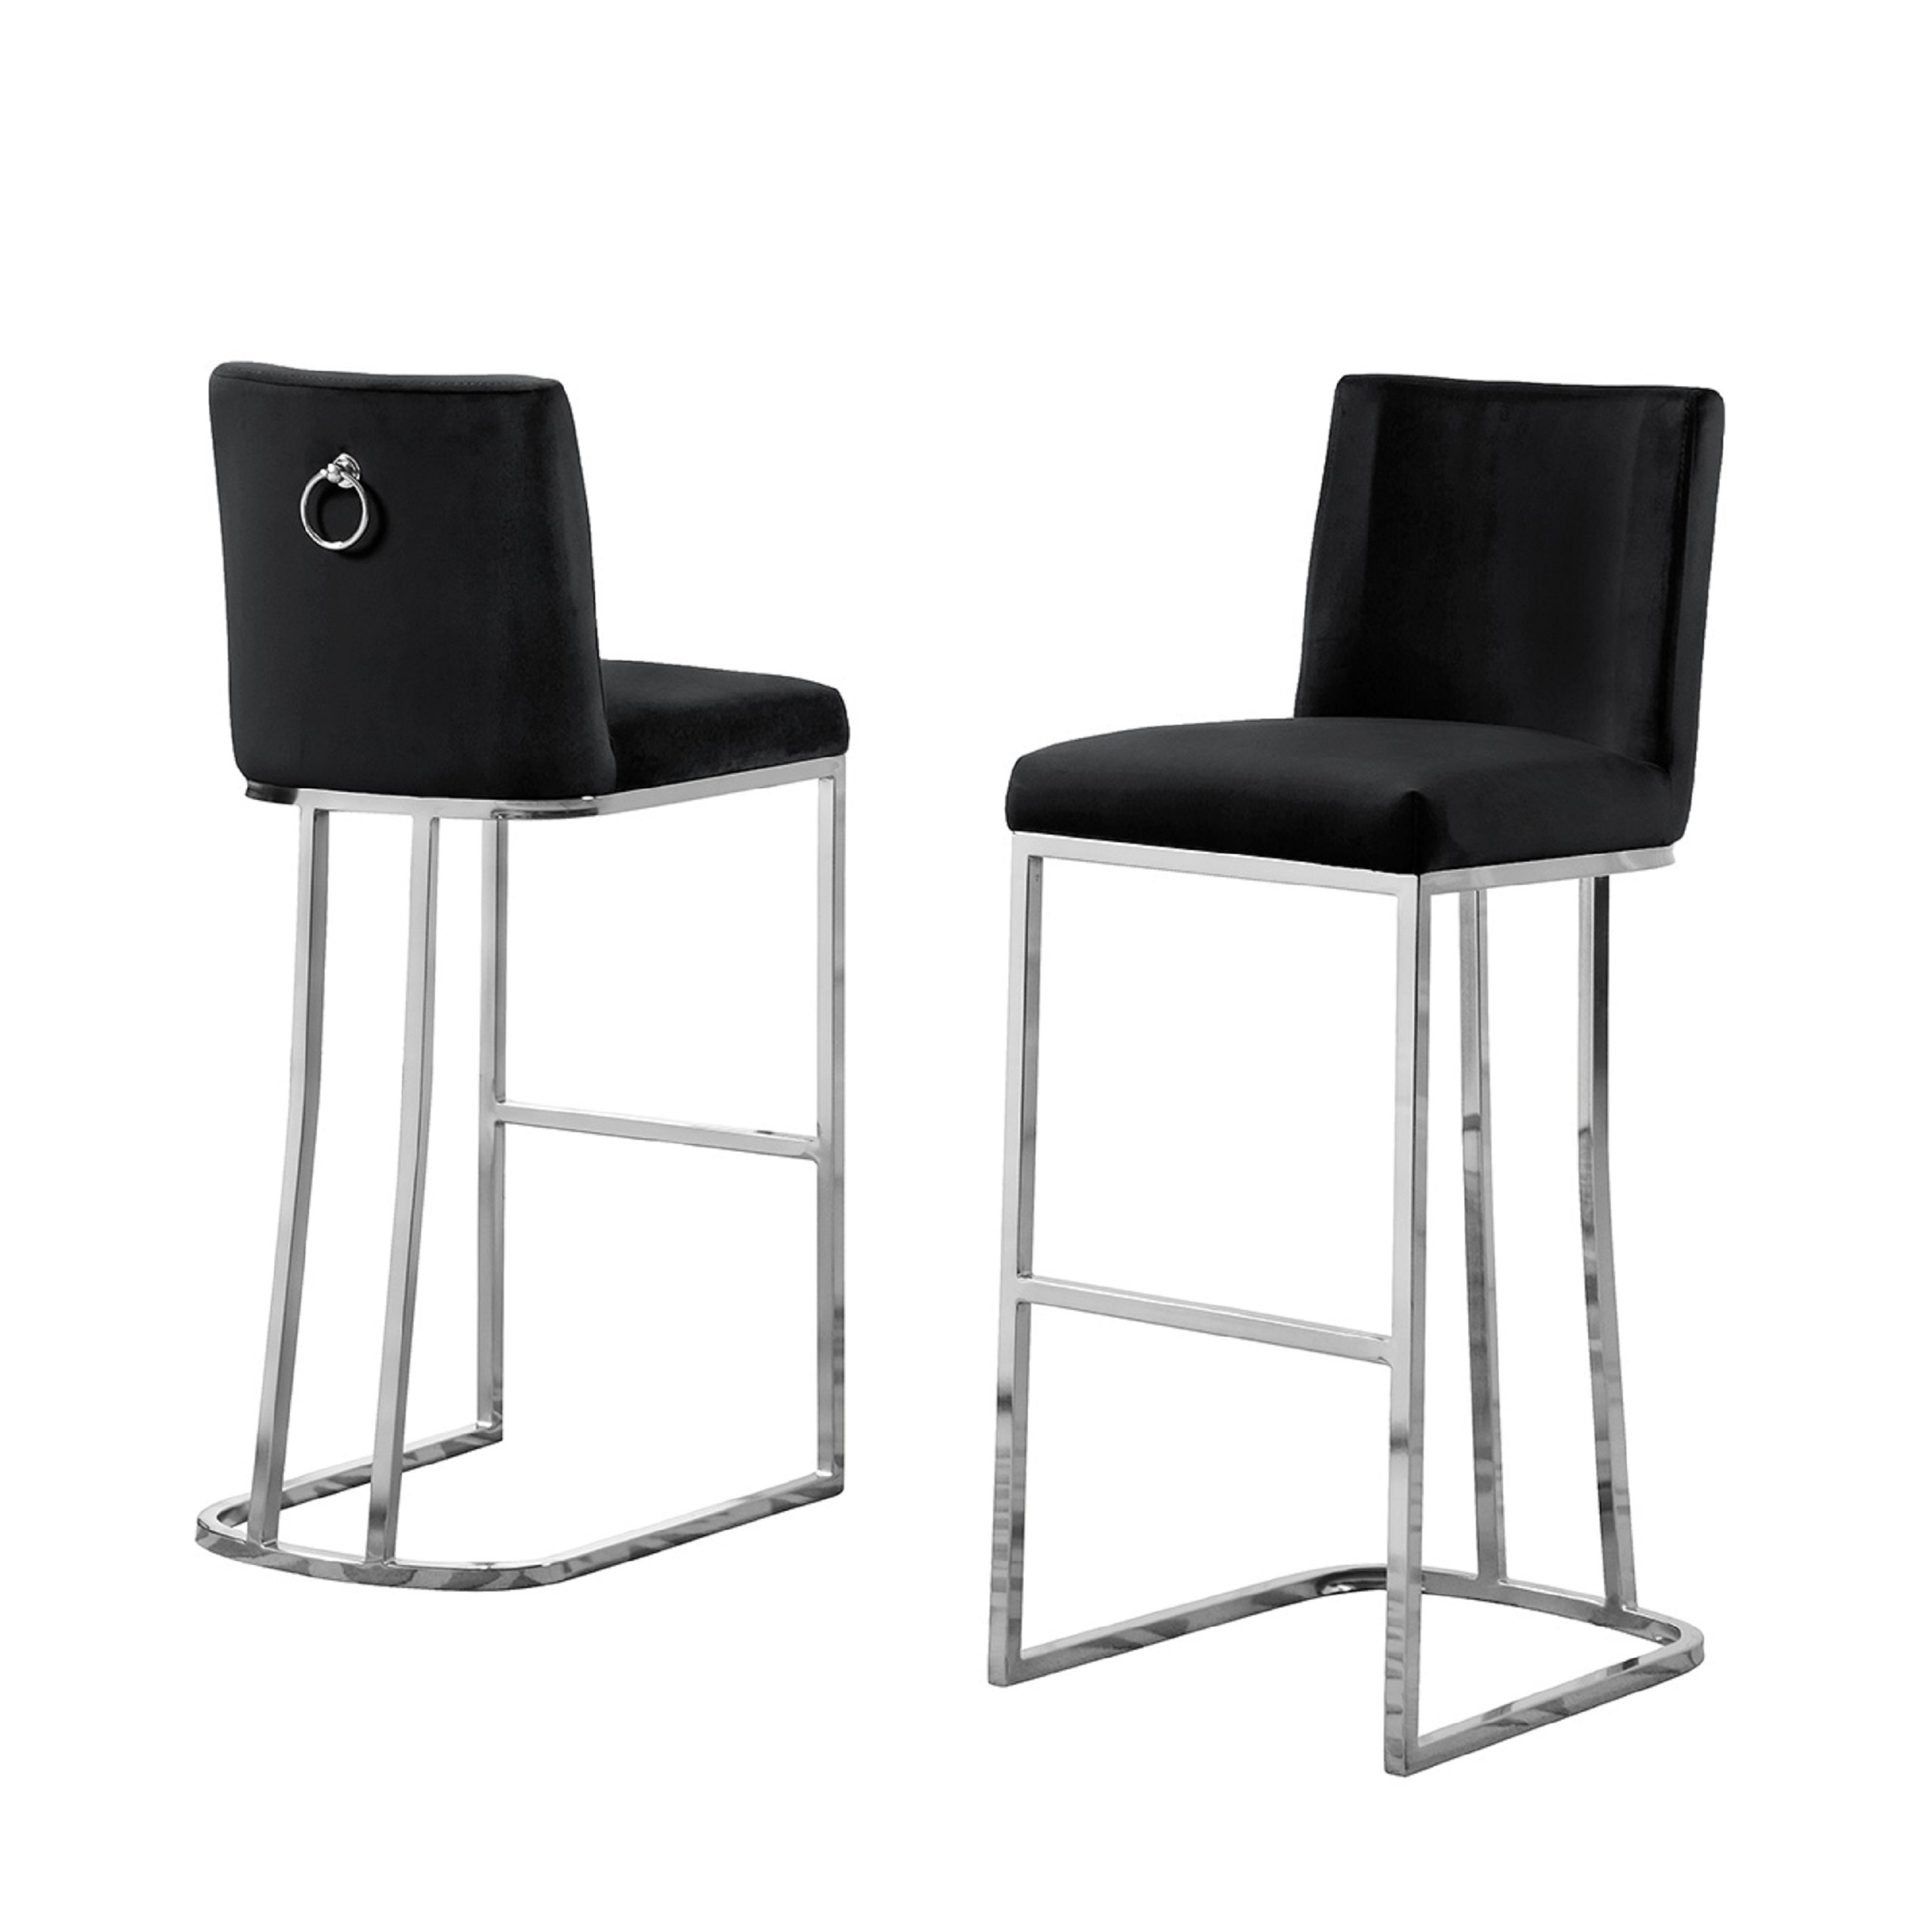 Pair of Blaise Barstools Quality Bonded Leather Bar stool With Chrome Base 